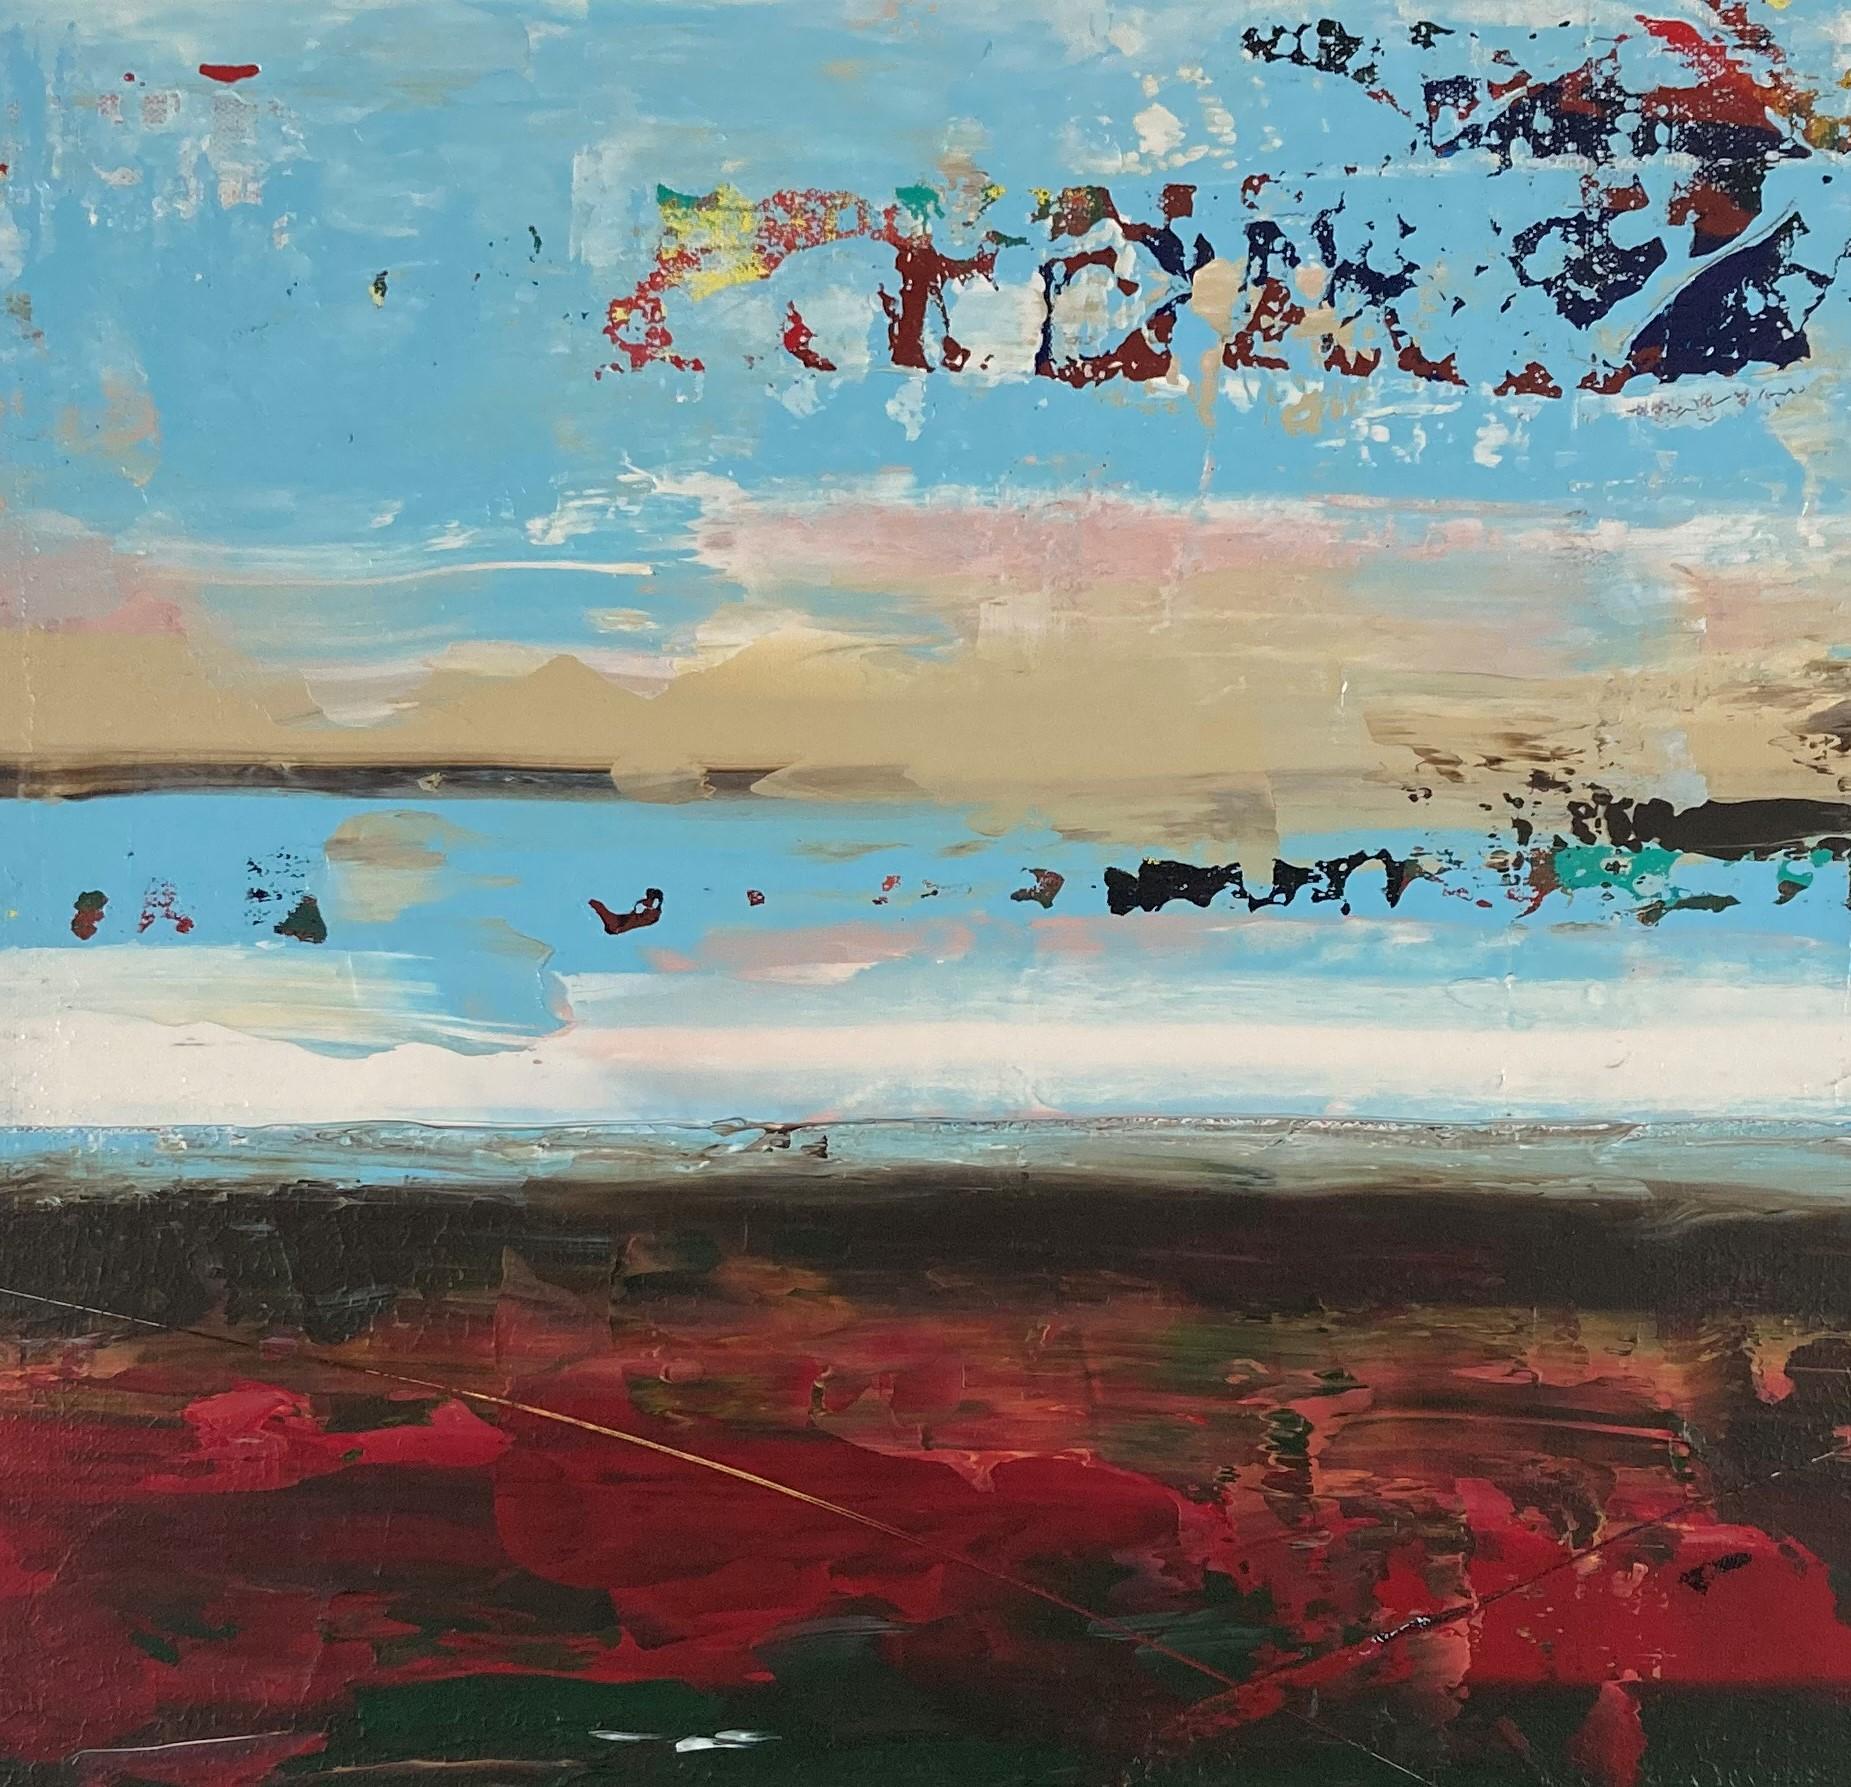 <p>Artist Comments<br>Vast fields of red, green, and brown meet and endless sky by artist Gary J. Noland. Part of his ongoing series of abstract landscapes, Gary paints bold strokes of color on vertical planes. He utilizes multiple layers of acrylic